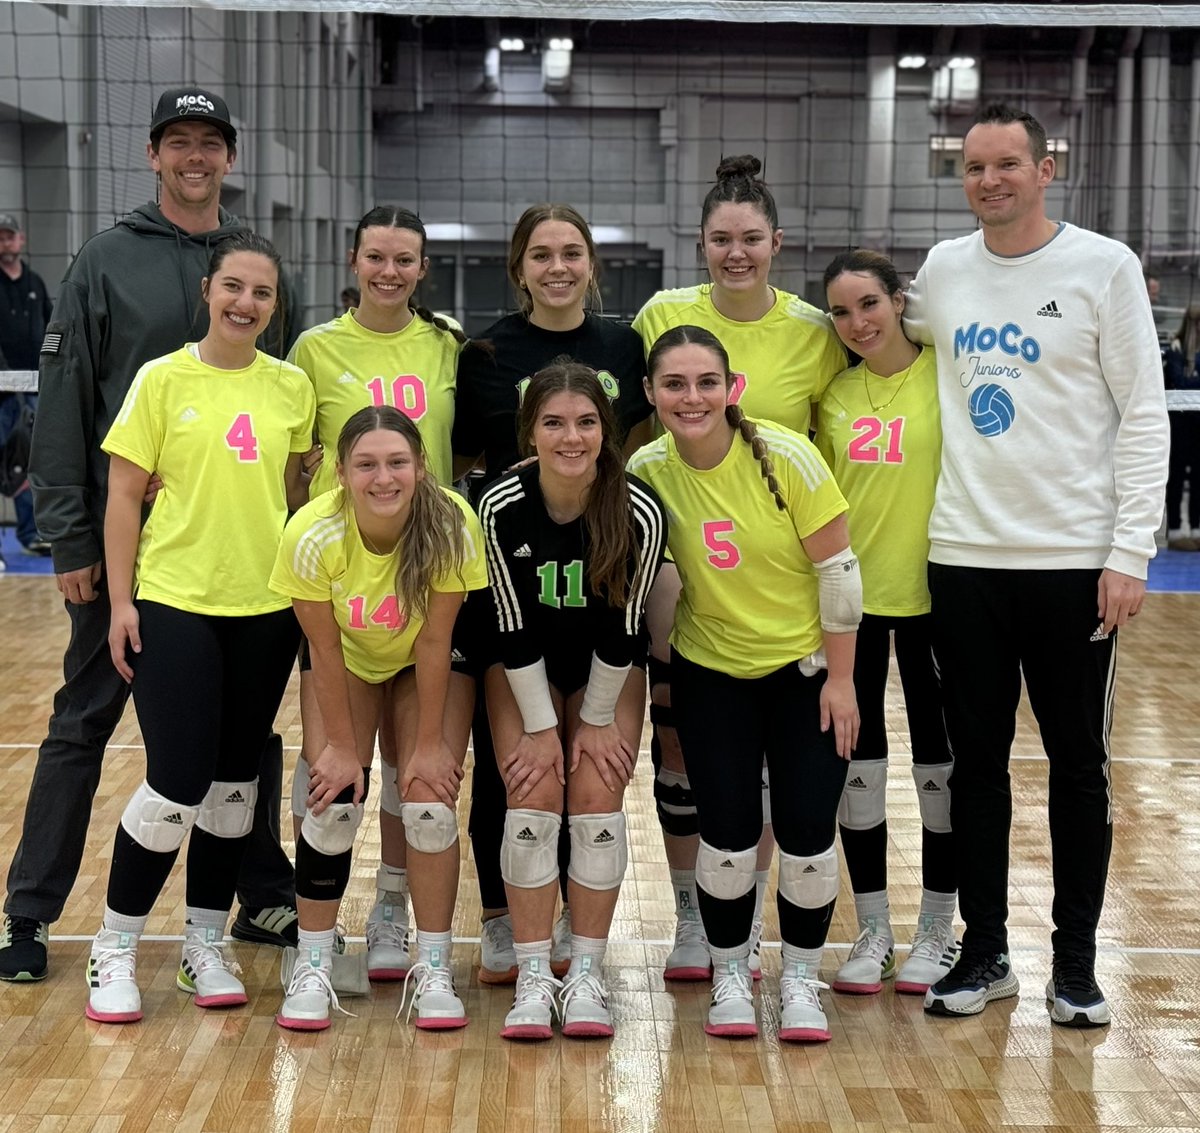 The Scintillating Seven strike! Back from the brink, winning their crossover to stay alive and in contention in 18 American division at @LoneStarClassic 18’s Qualifier in Austin! #MoCoFam